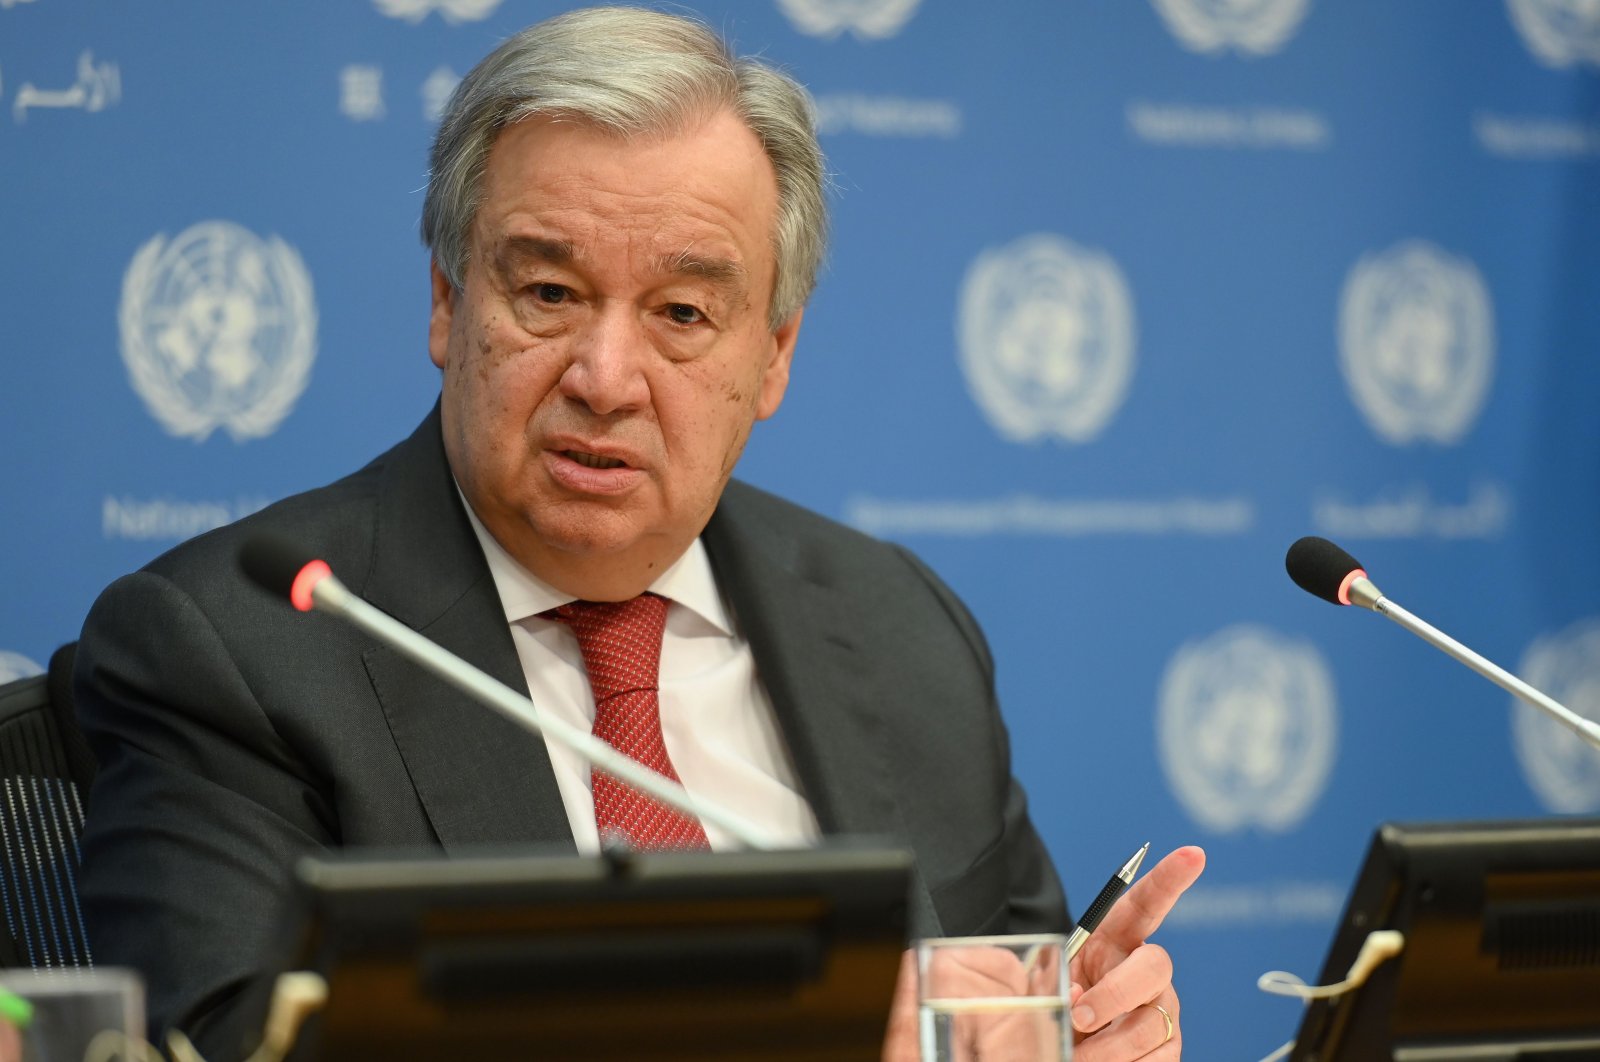 United Nations Secretary-General Antonio Guterres speaks during a press briefing at the U.N. Headquarters in New York City, Feb. 4, 2020. (AFP Photo)